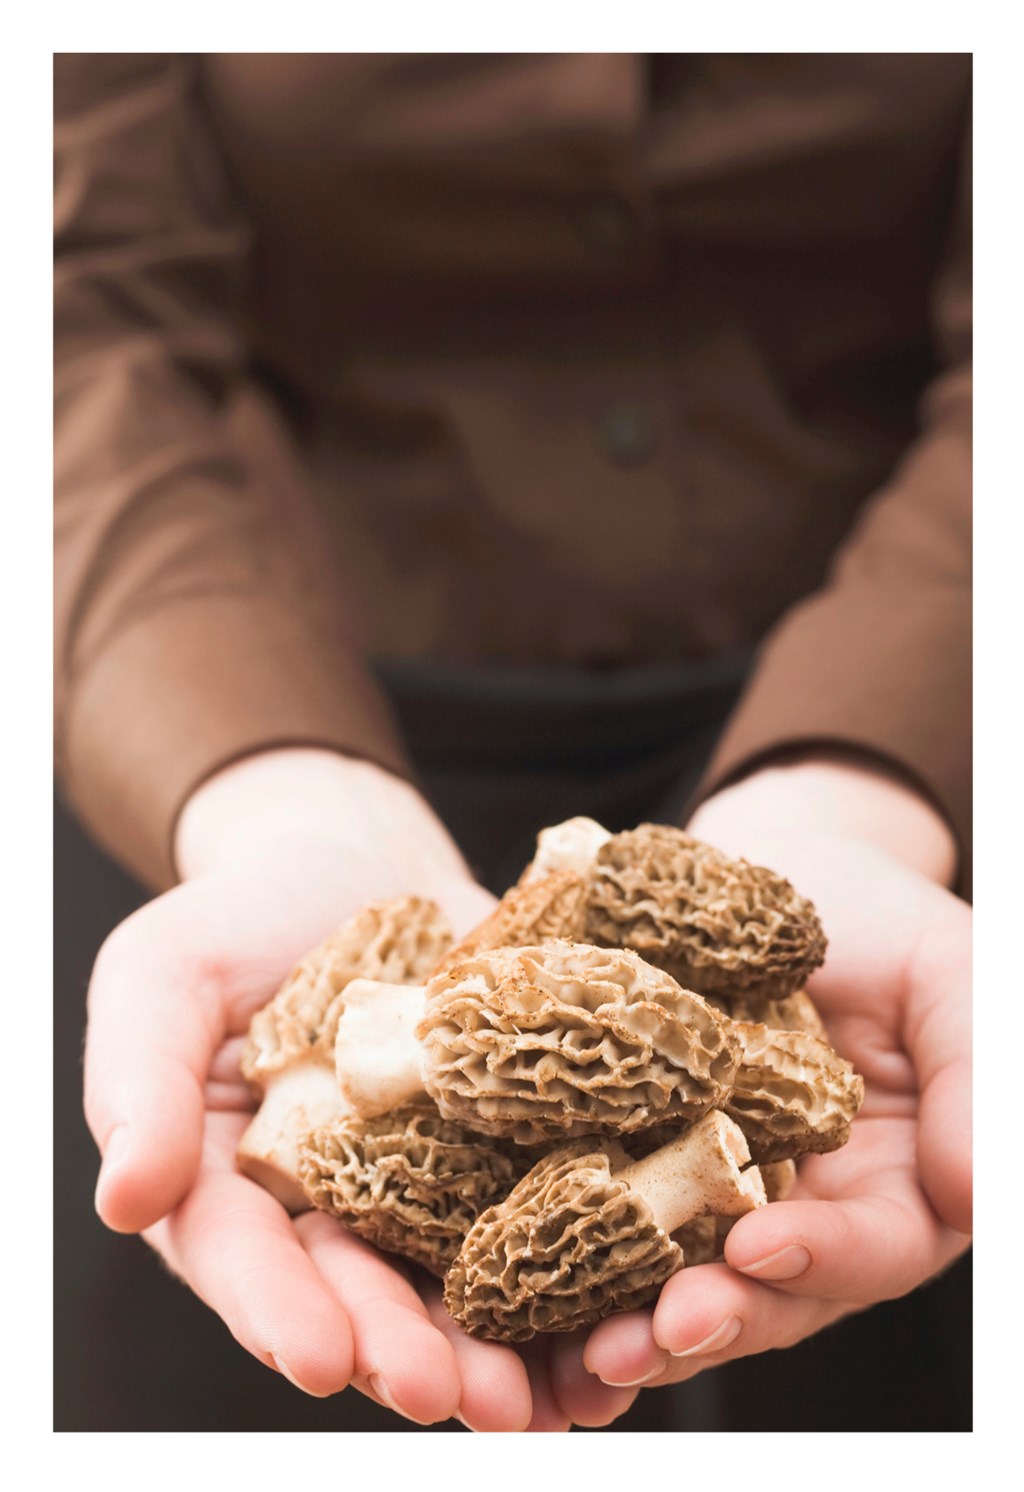 May is for Morels